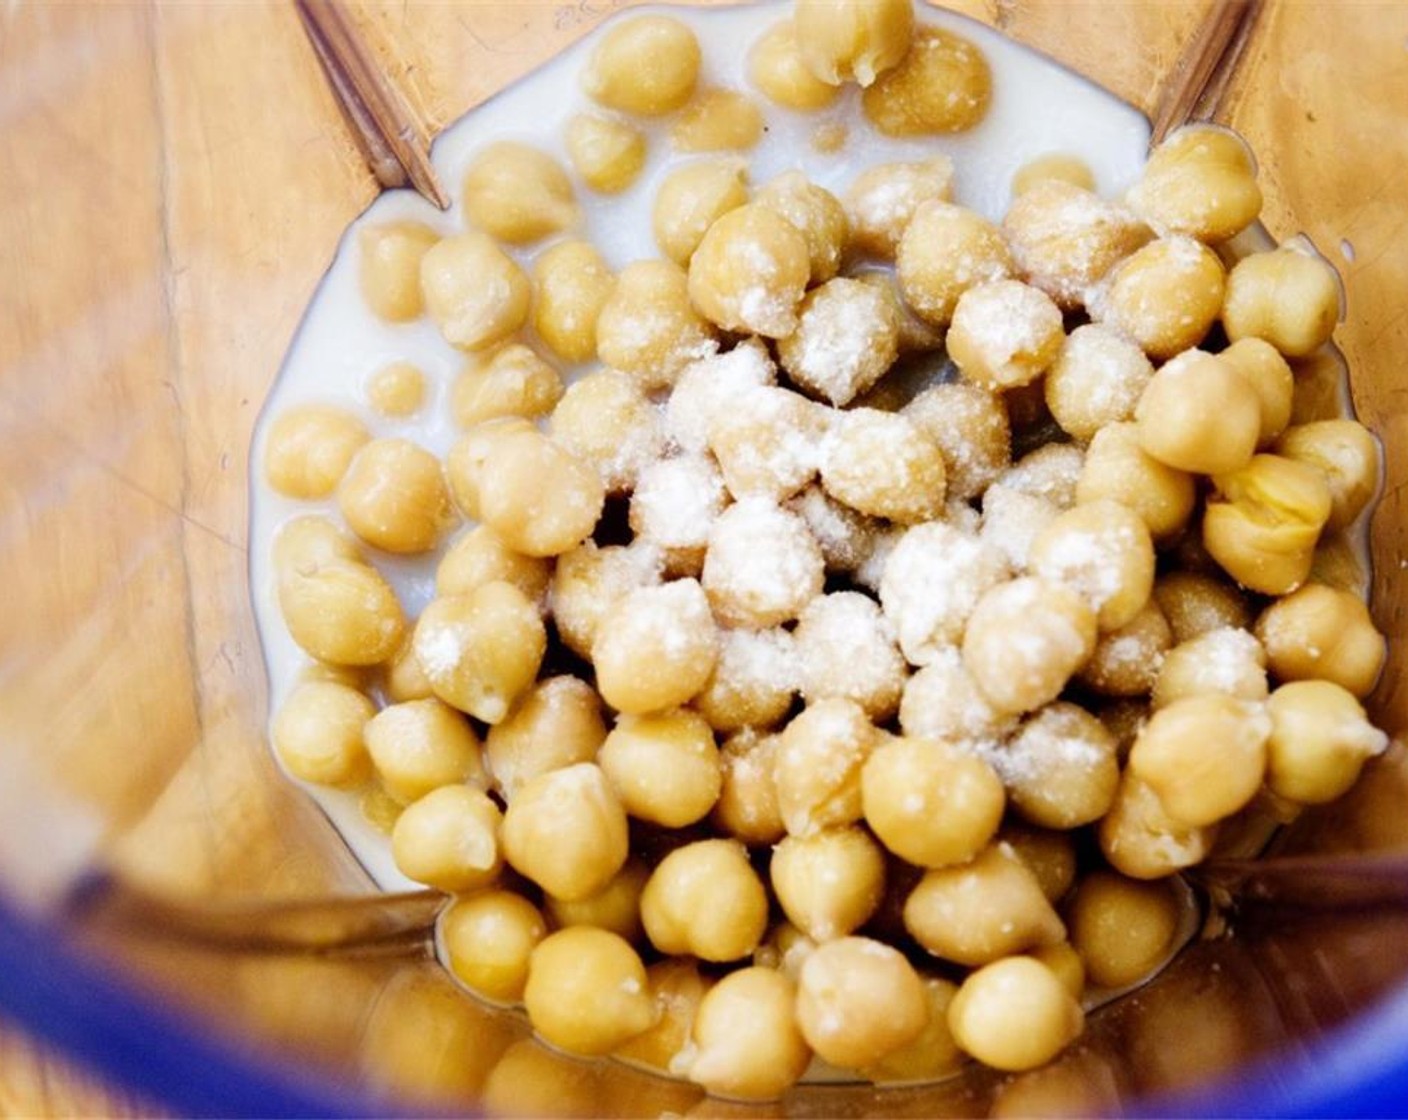 step 2 Wash and rinse the Canned Chickpeas (1 1/4 cups), then add them together with the Almond Milk (1/3 cup) to a blender or food processor.